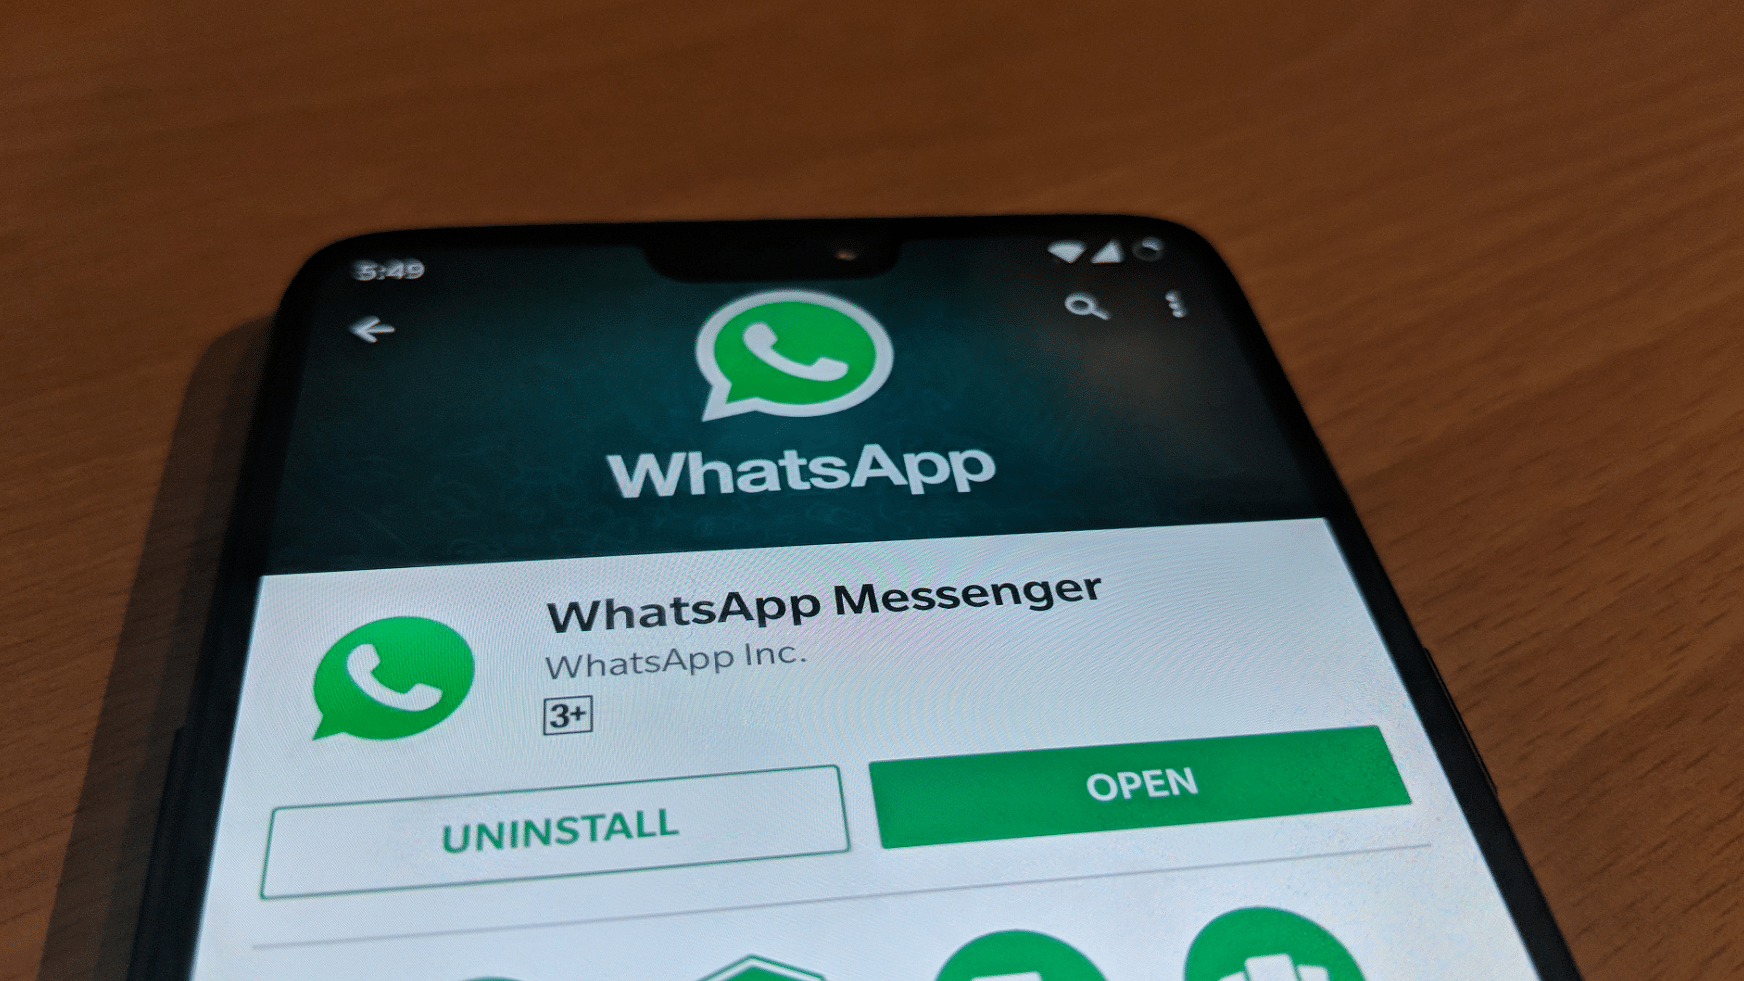 WhatsApp has updated its Group privacy features.